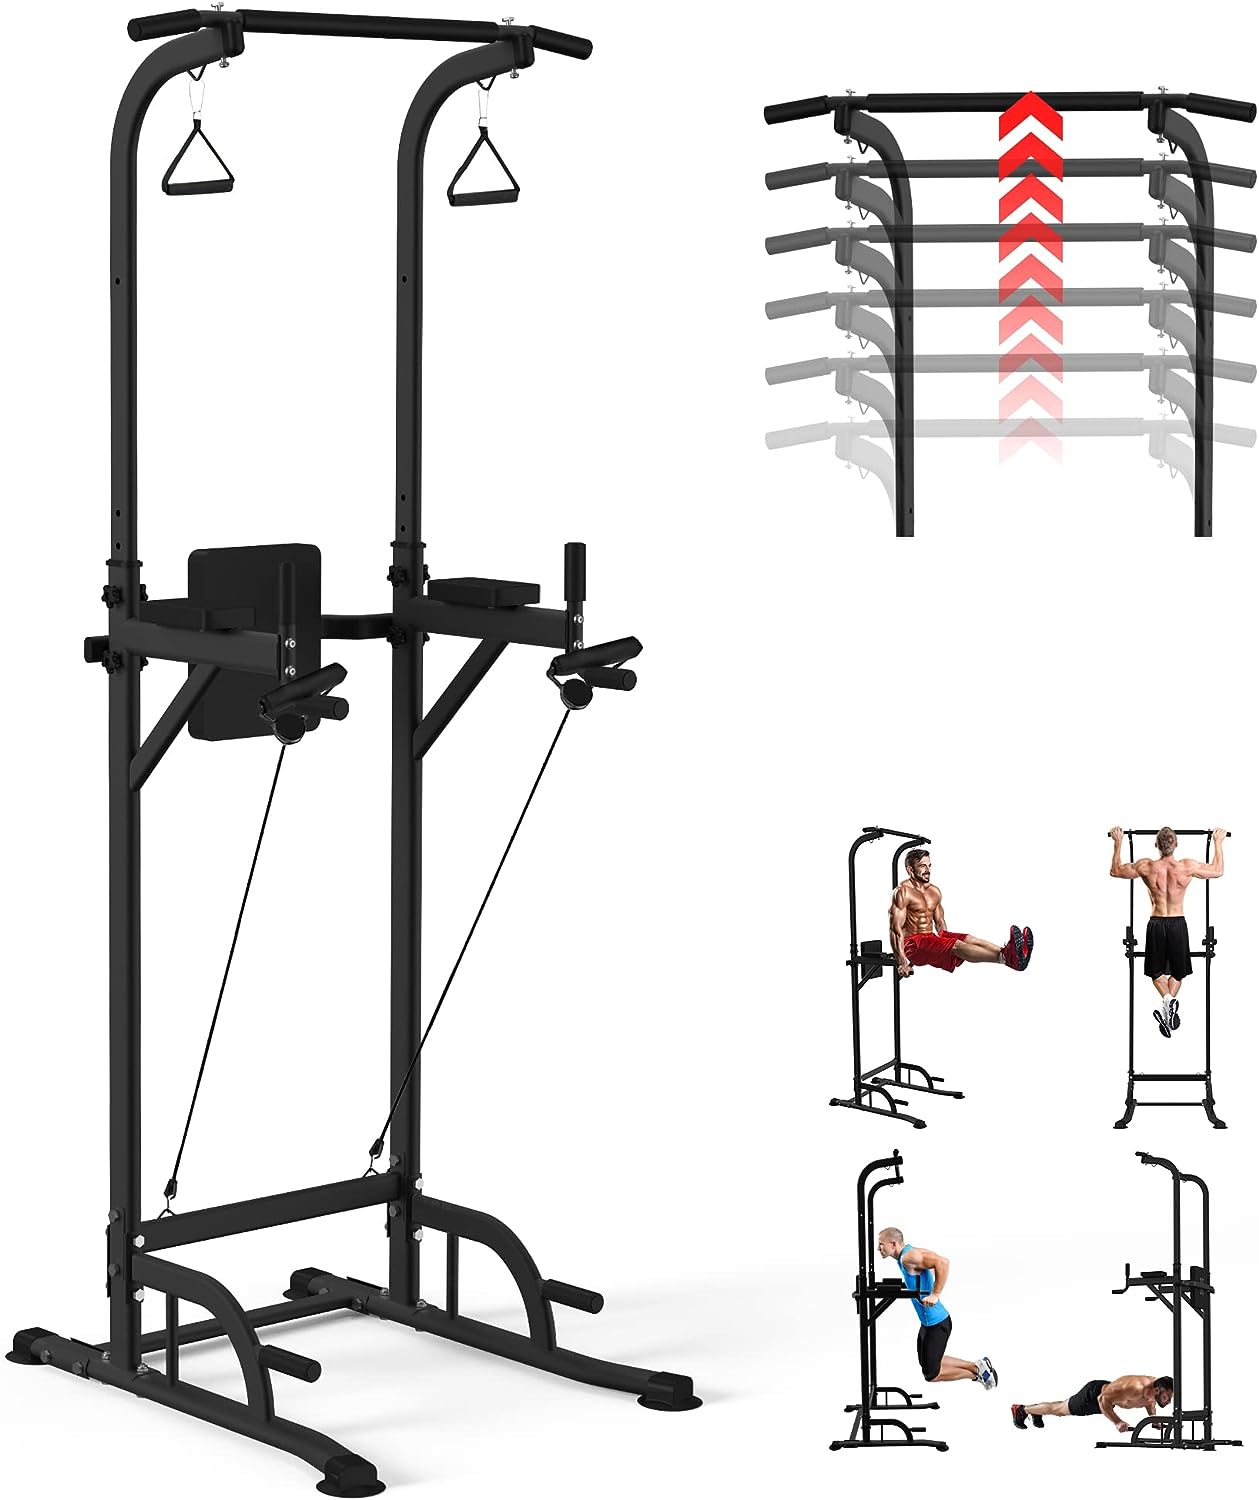 Dip Bar Station Multi-Function Pull-Up Bar for Home Gym Strength Training Workout Exercise Fitness Equipment 